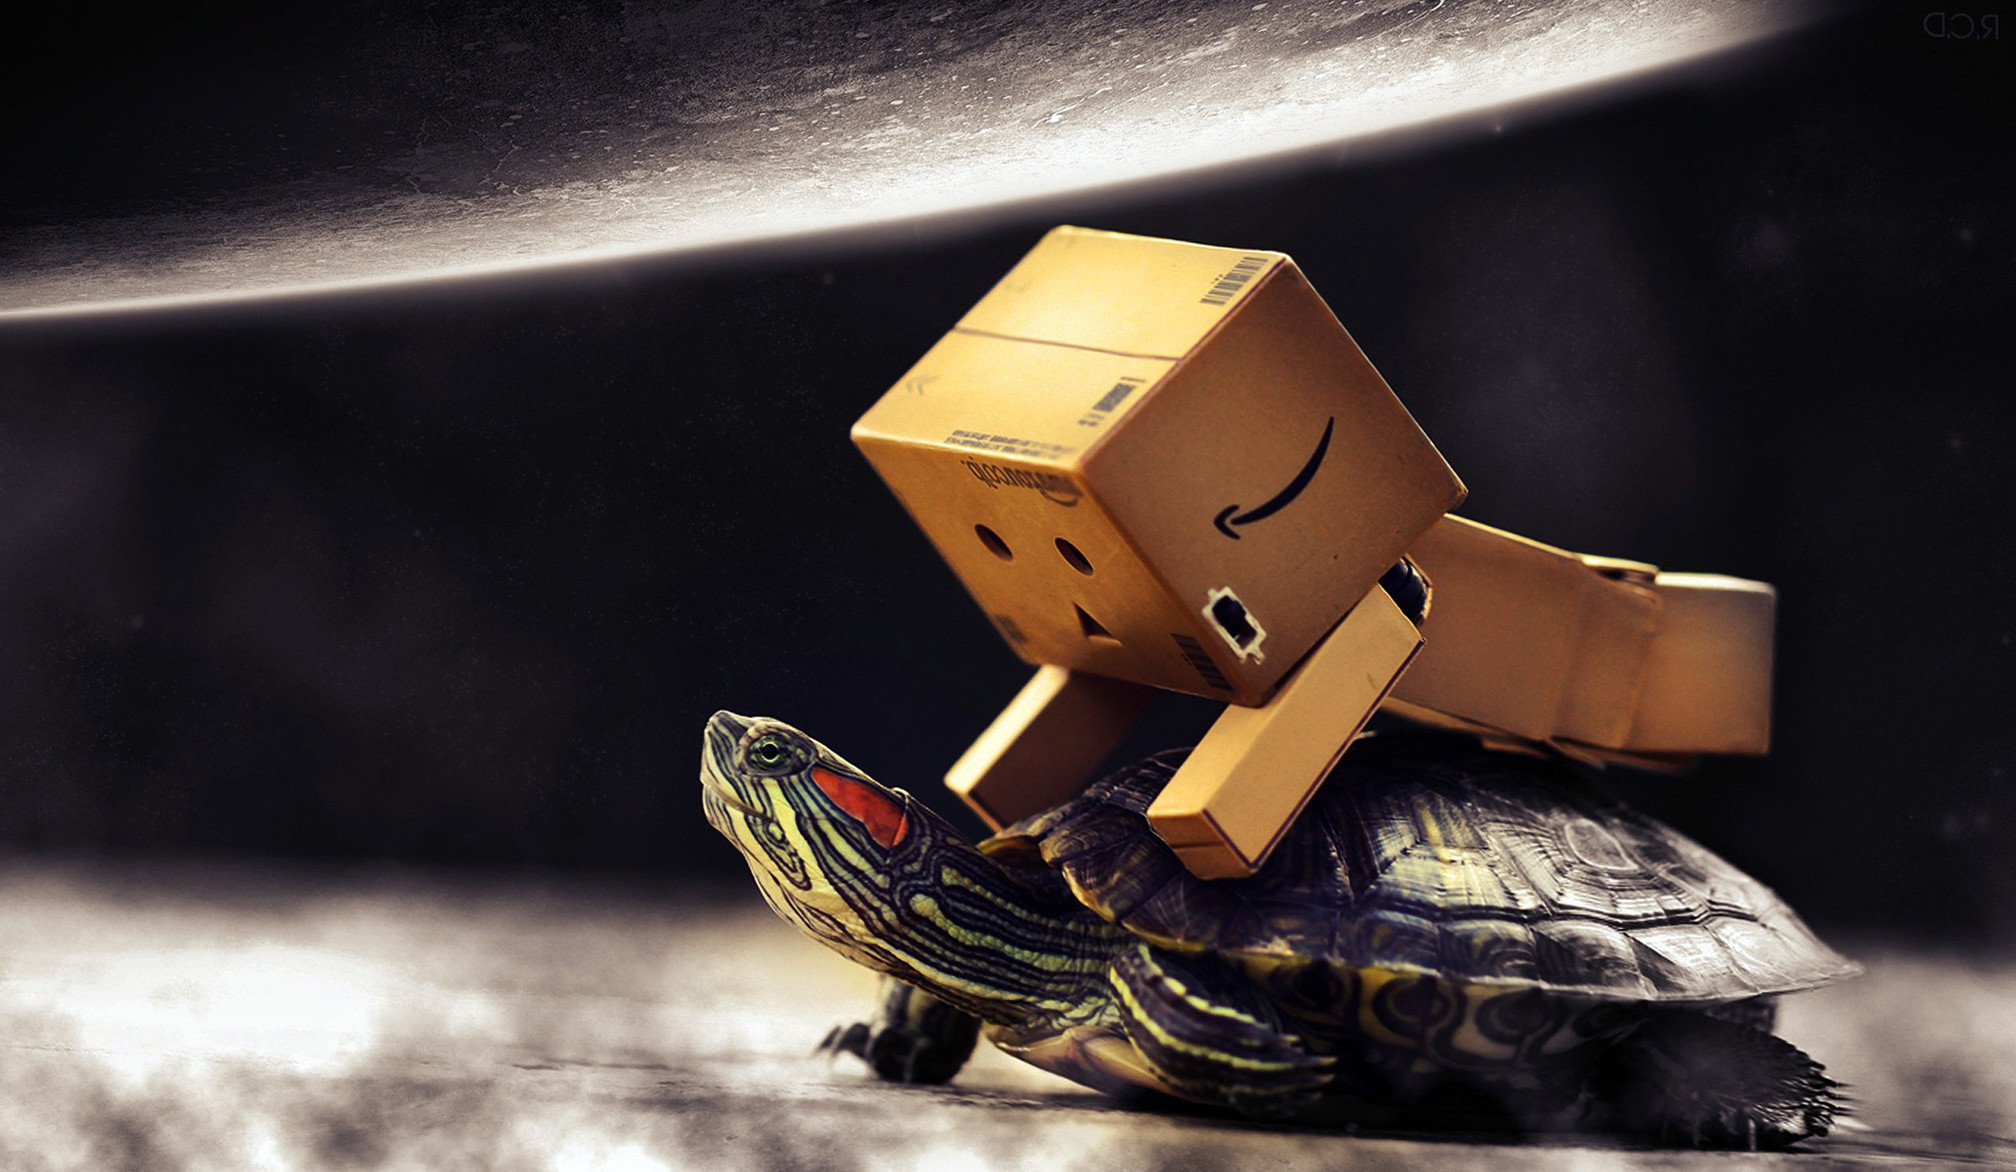 Danboard Box Man And Baby Turtle Wallpapers HD / Desktop and Mobile Backgrounds